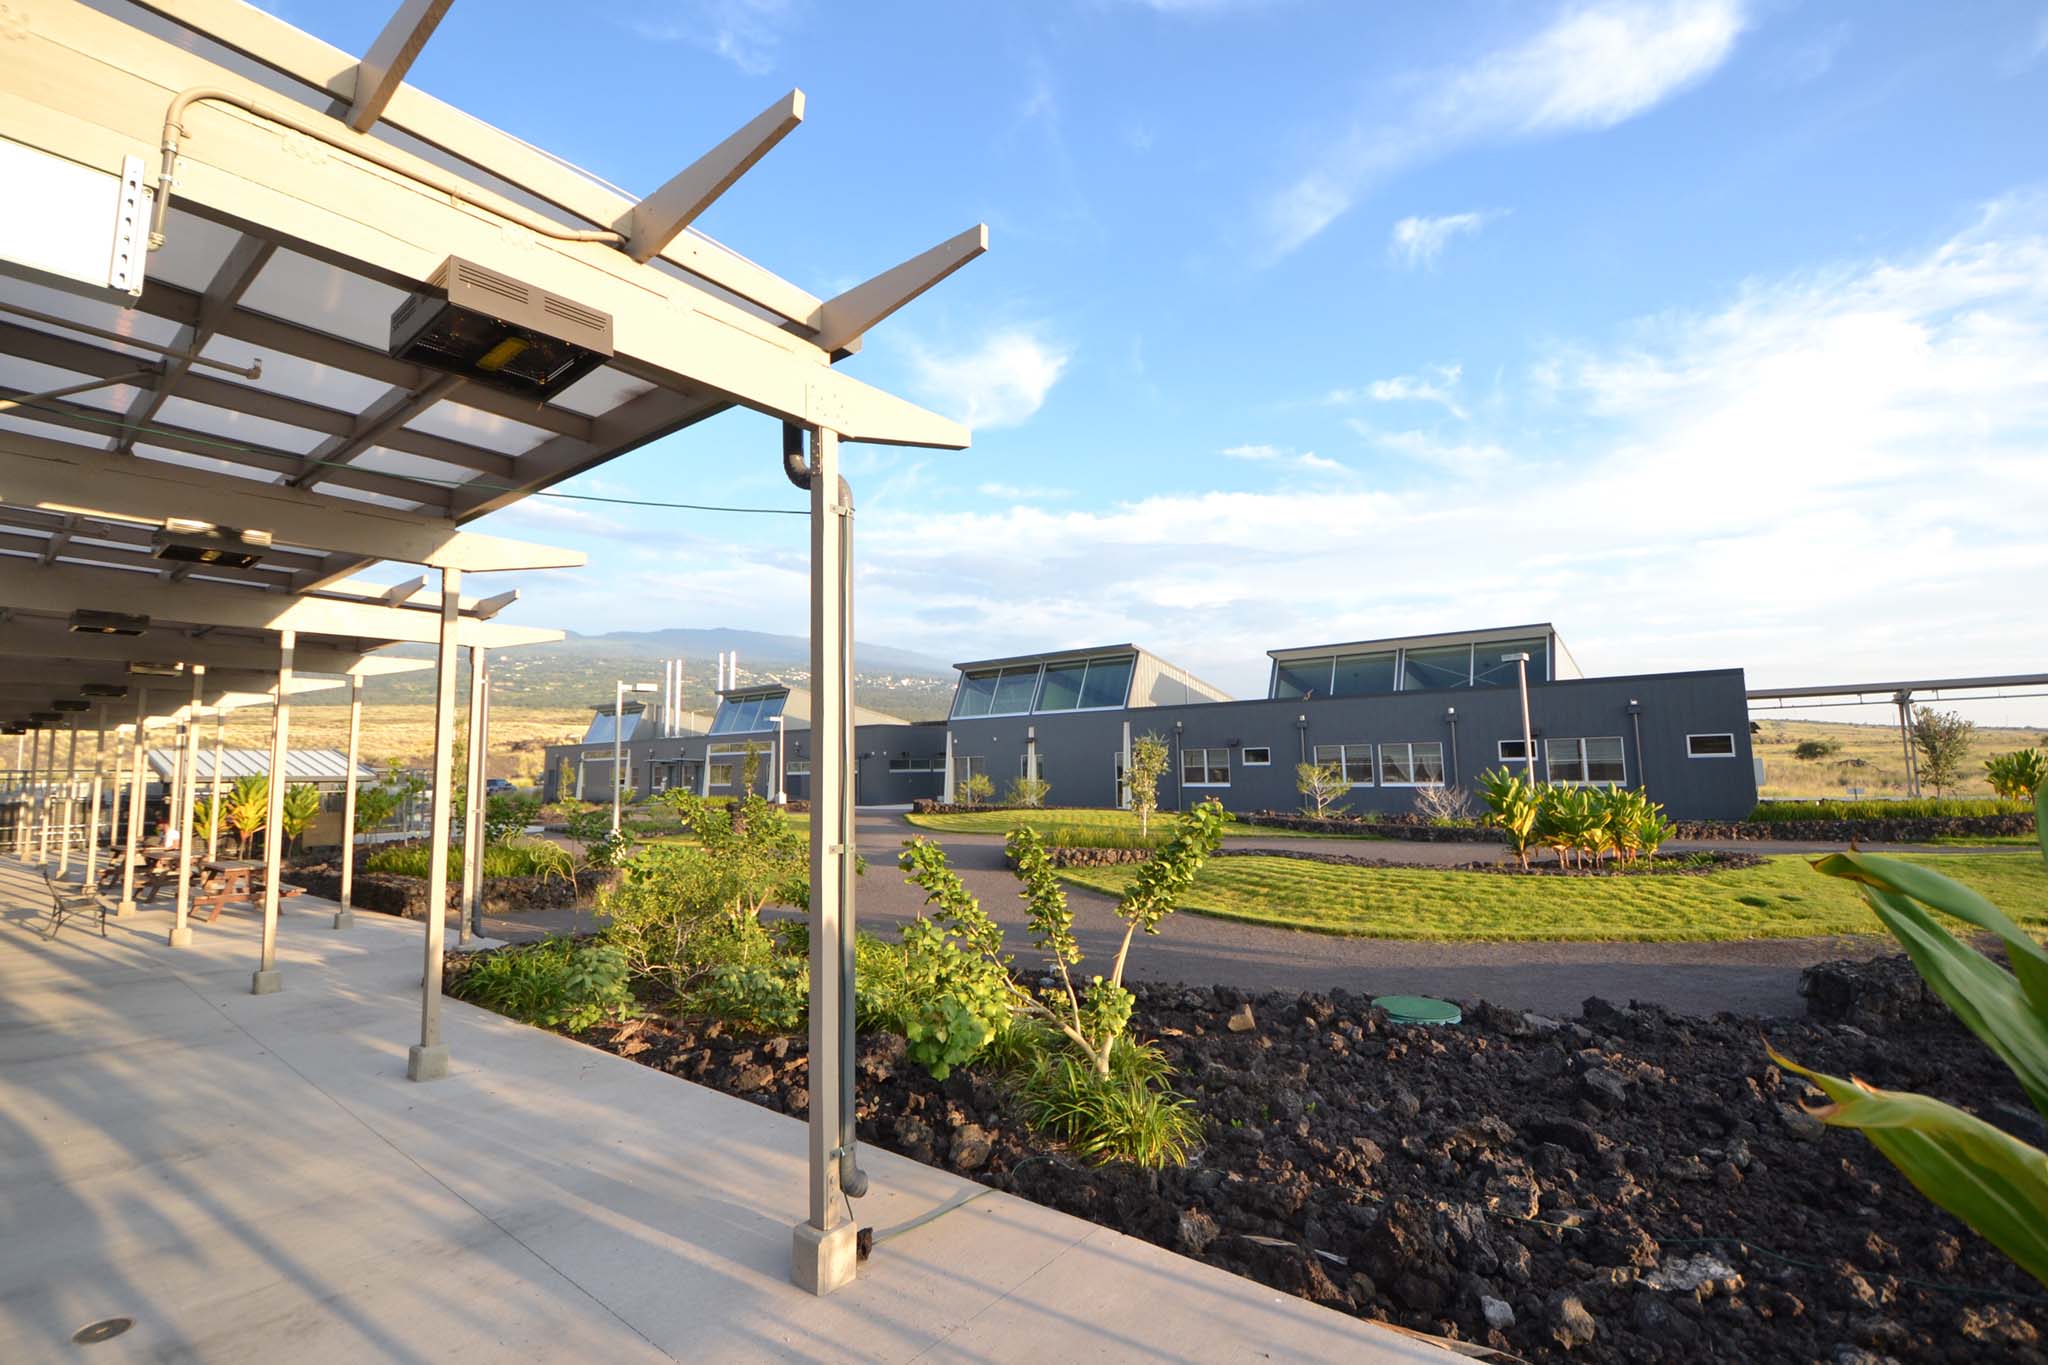 photo of Hawaii Community College Palamanui photo voltaic system